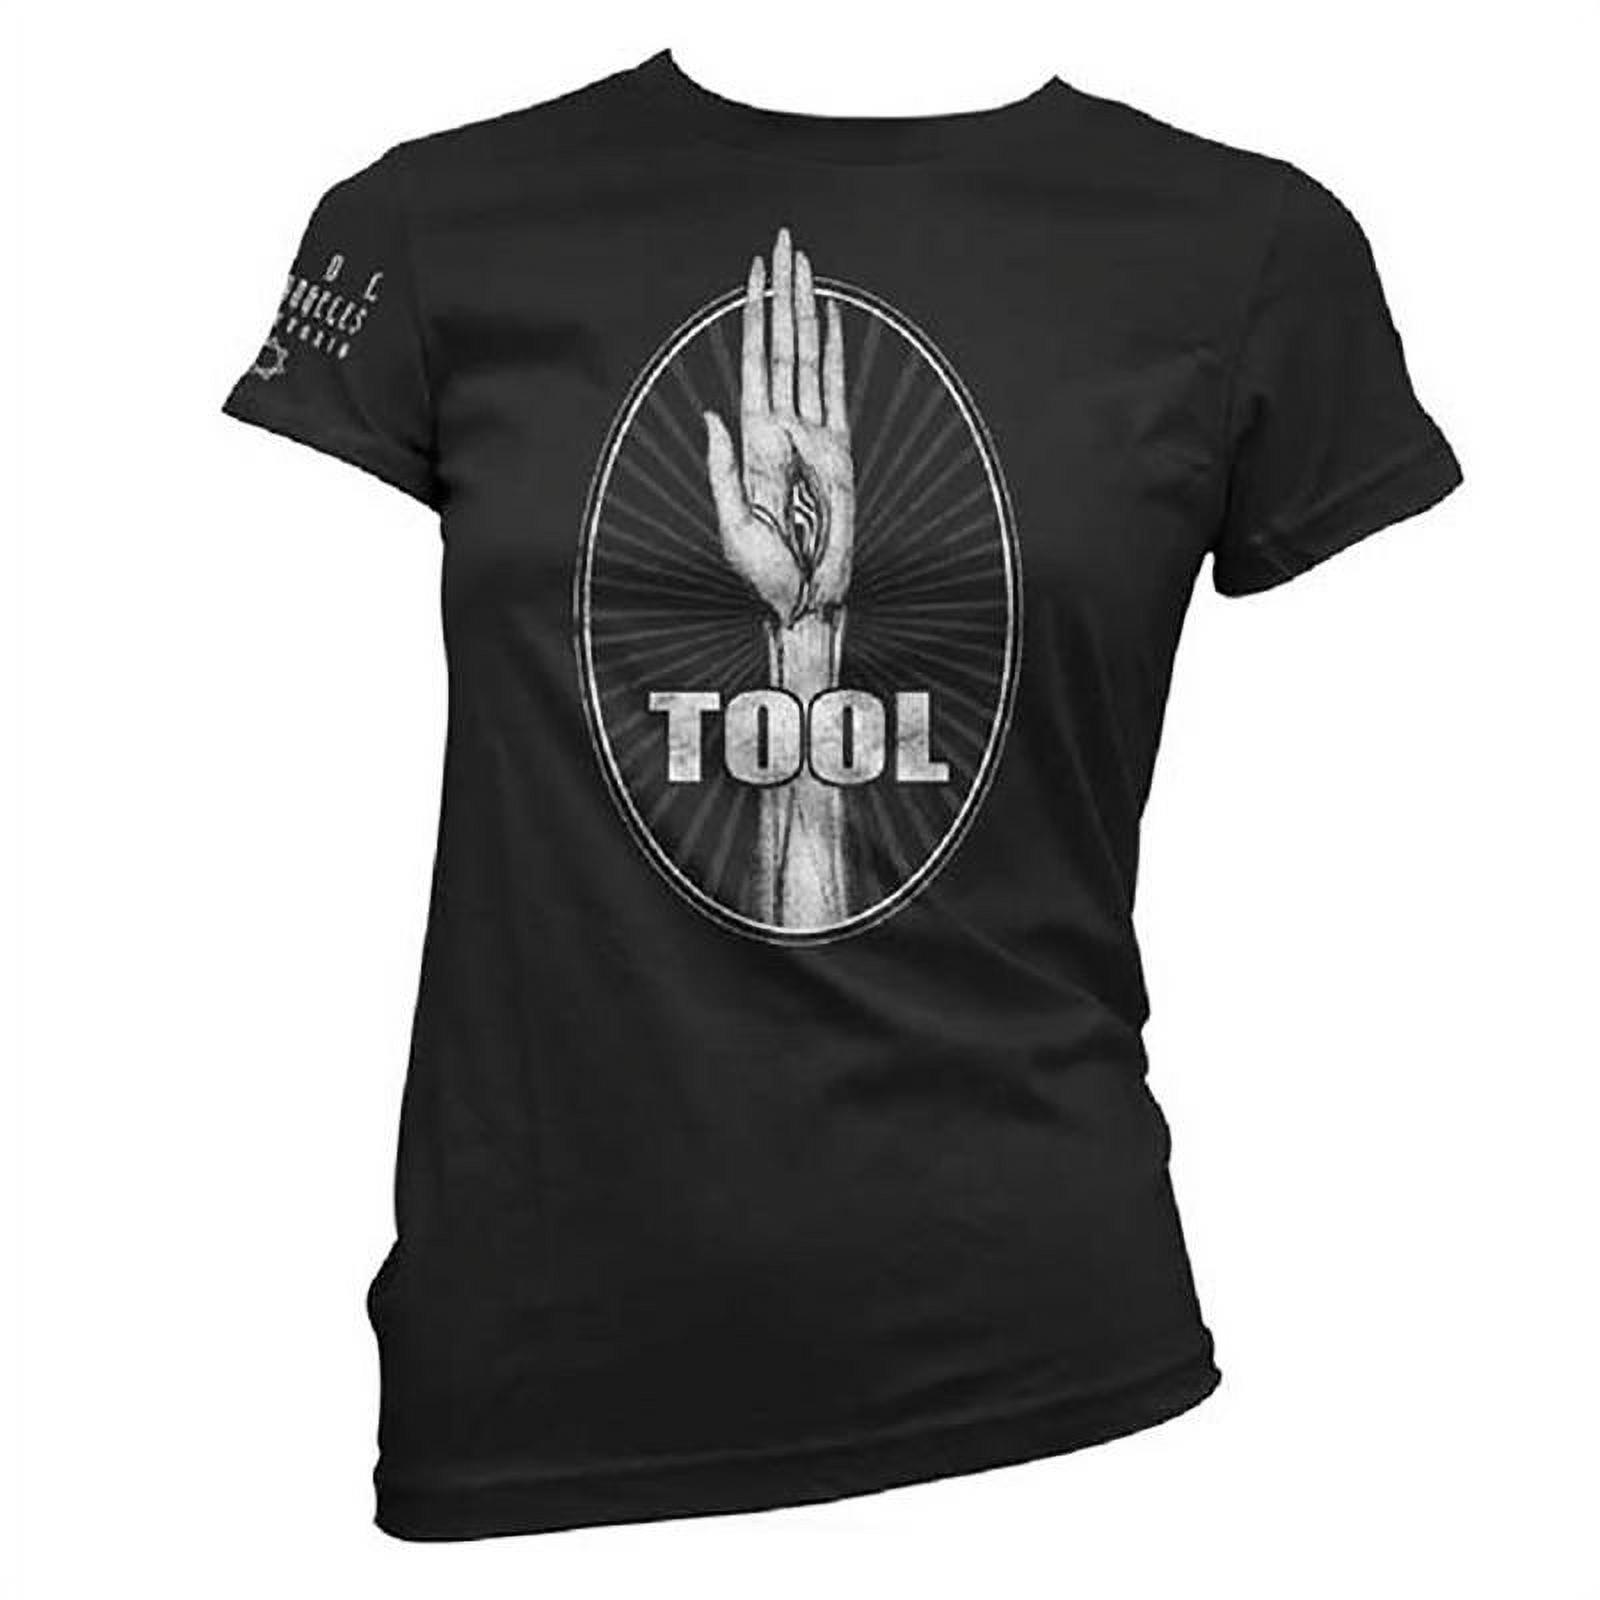 Tool Band Eye In Hand Women's Black T-Shirt + Coolie (L) 